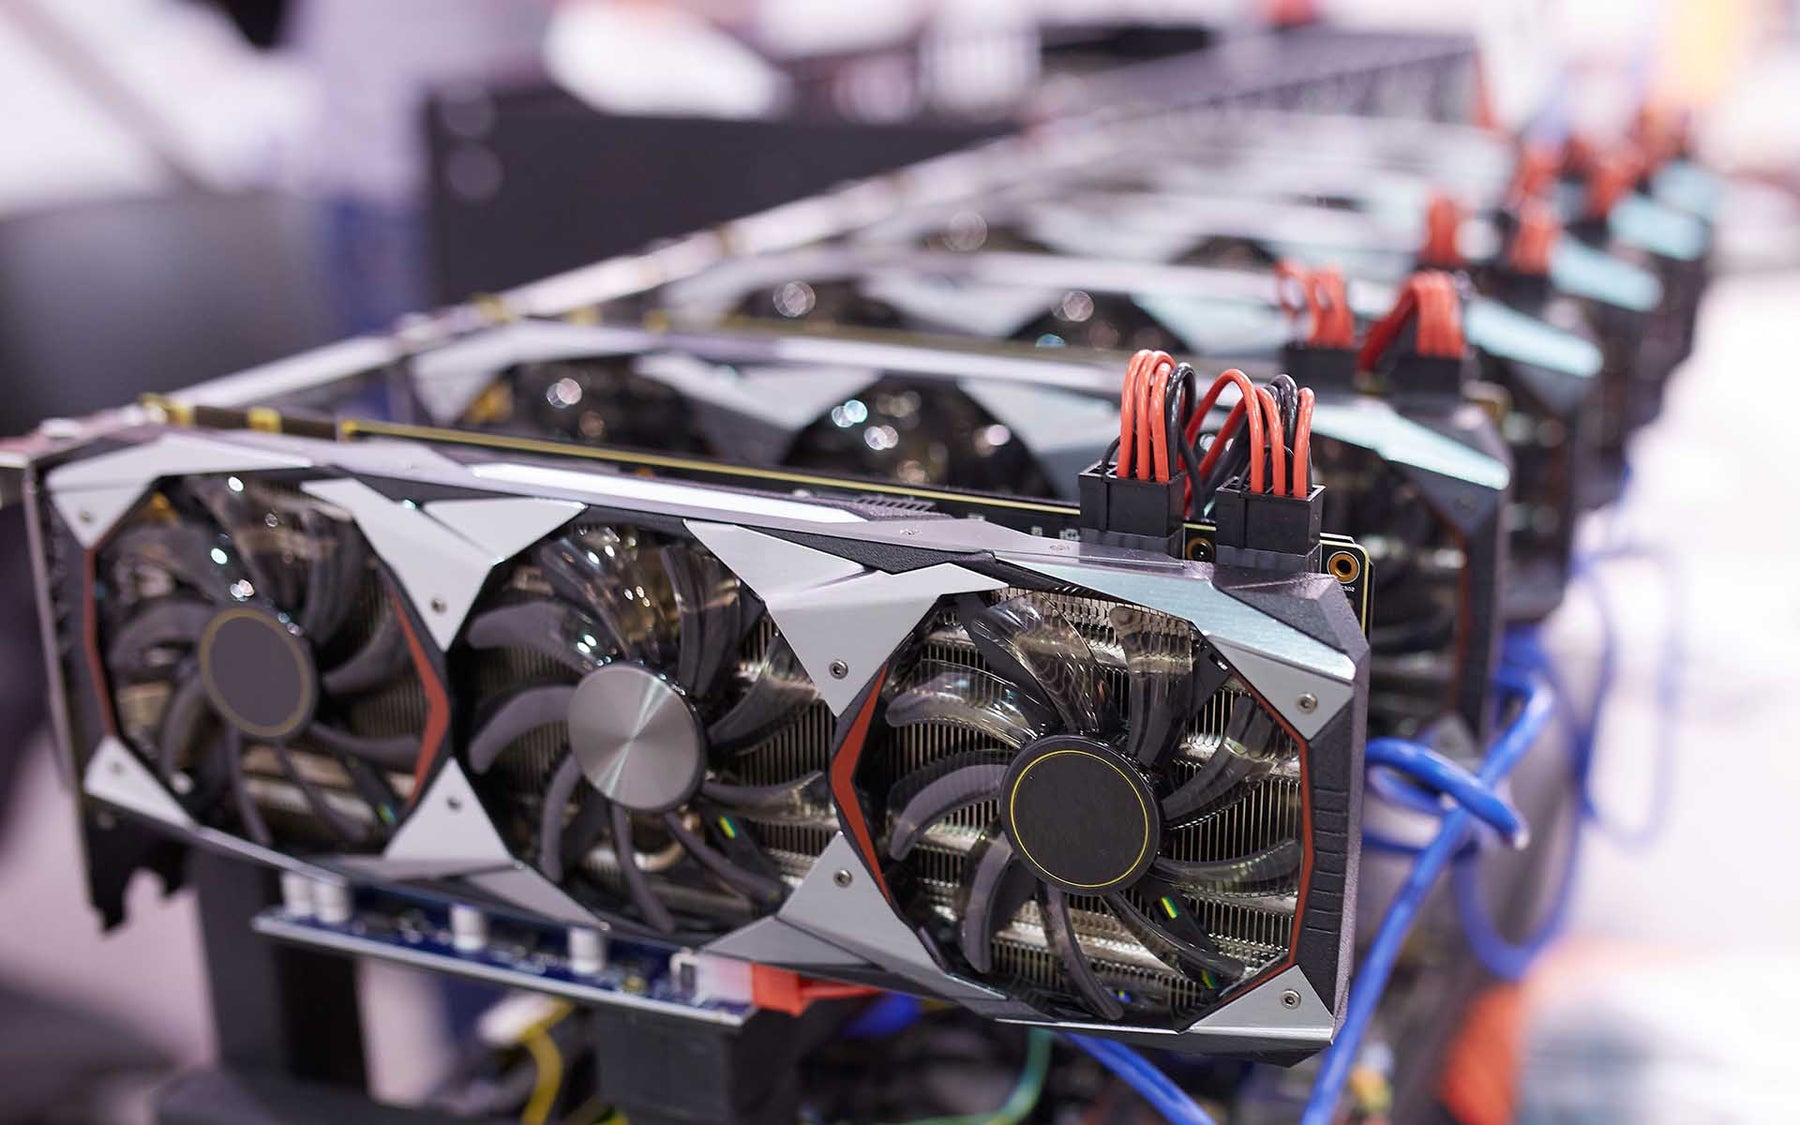 Here at Cryptom Mining we stock a massive range of parts to allow you to pick and choose the specifiaction and items you need to build your GPU mining rig.